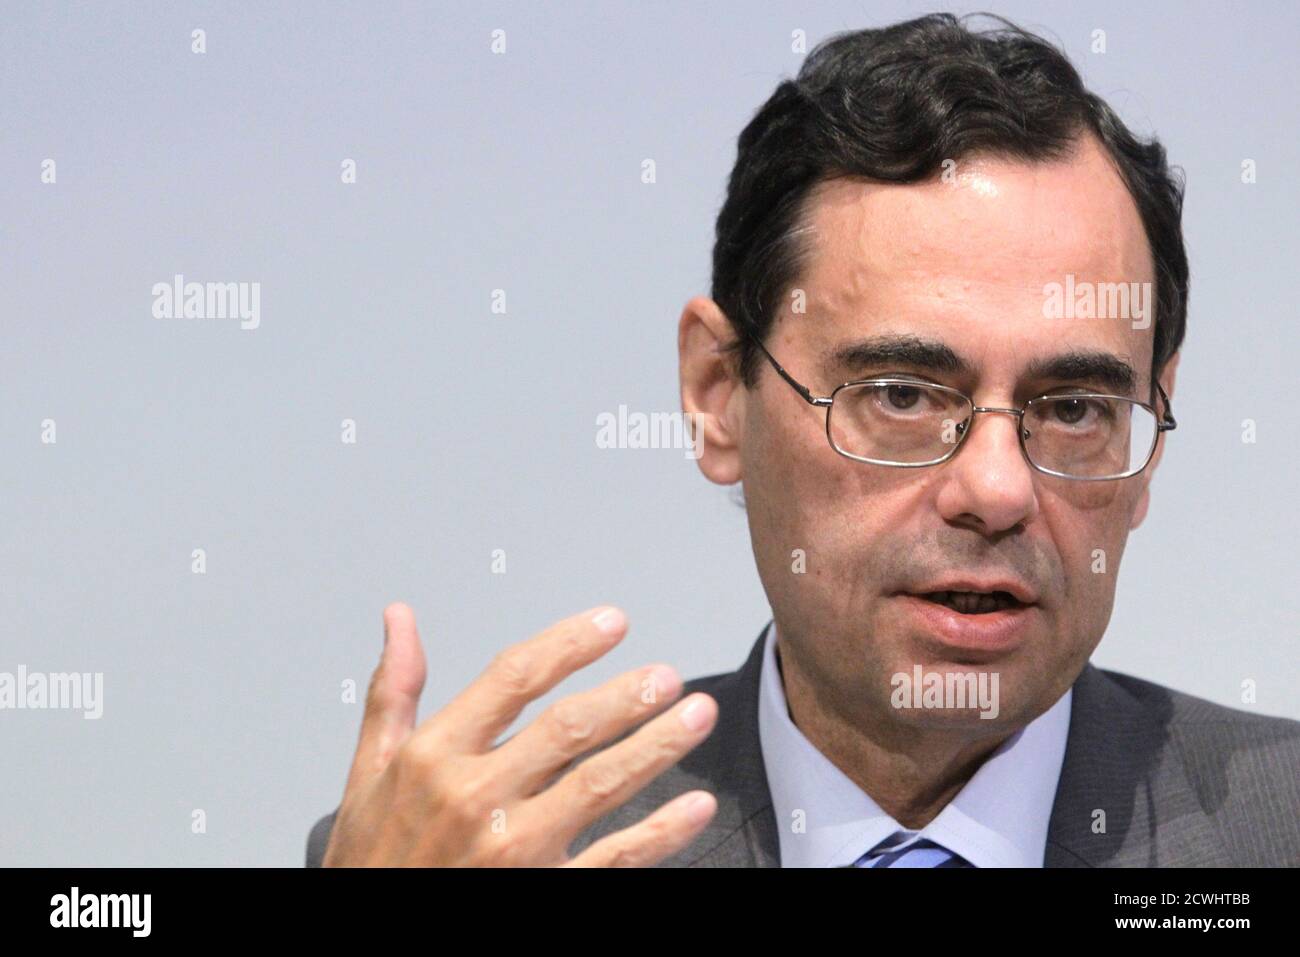 General Manager of the Bank for International Settlements (BIS) Jaime Caruana makes a speech during a meeting of the OeNB on the issue of 'Financial Crisis & Basel III' in Vienna October 3, 2011.    REUTERS/Herwig Prammer (AUSTRIA - Tags: BUSINESS) Stock Photo